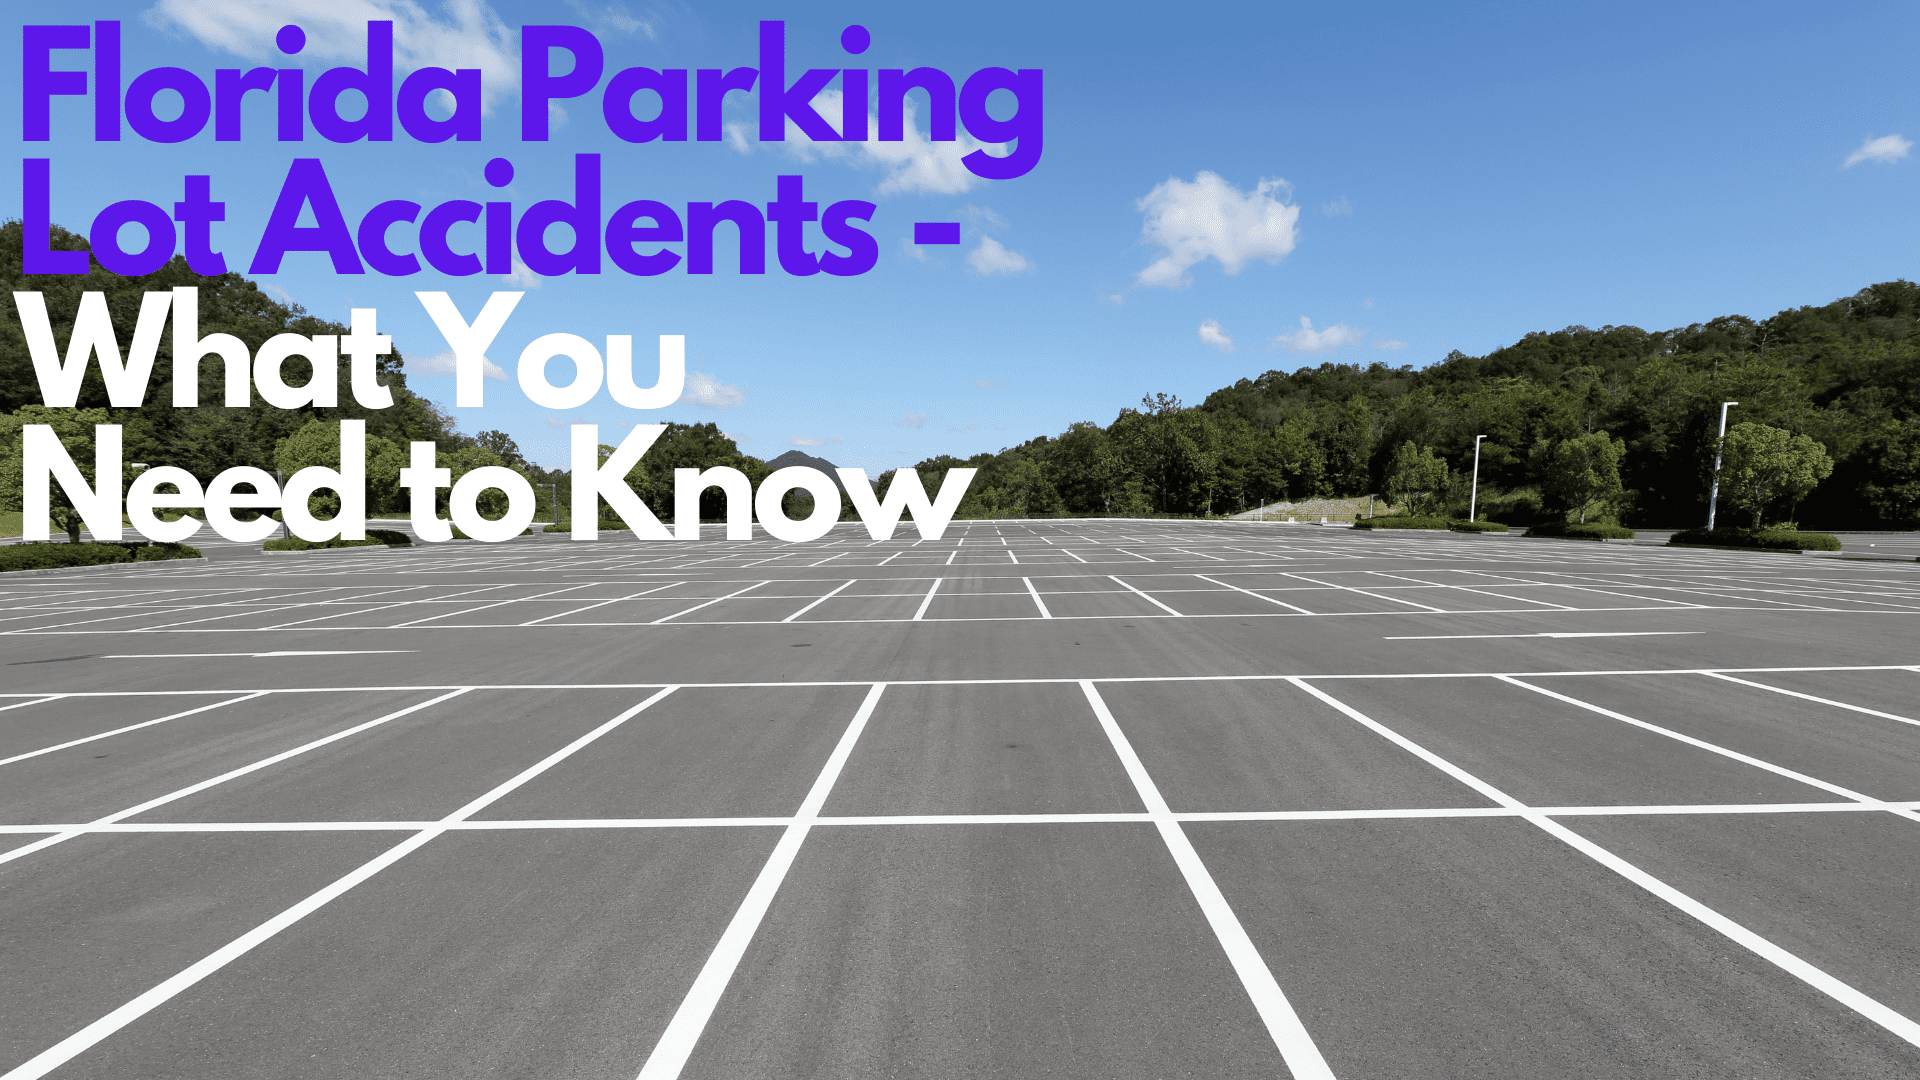 Florida Parking Lot Accidents – What You Need to Know